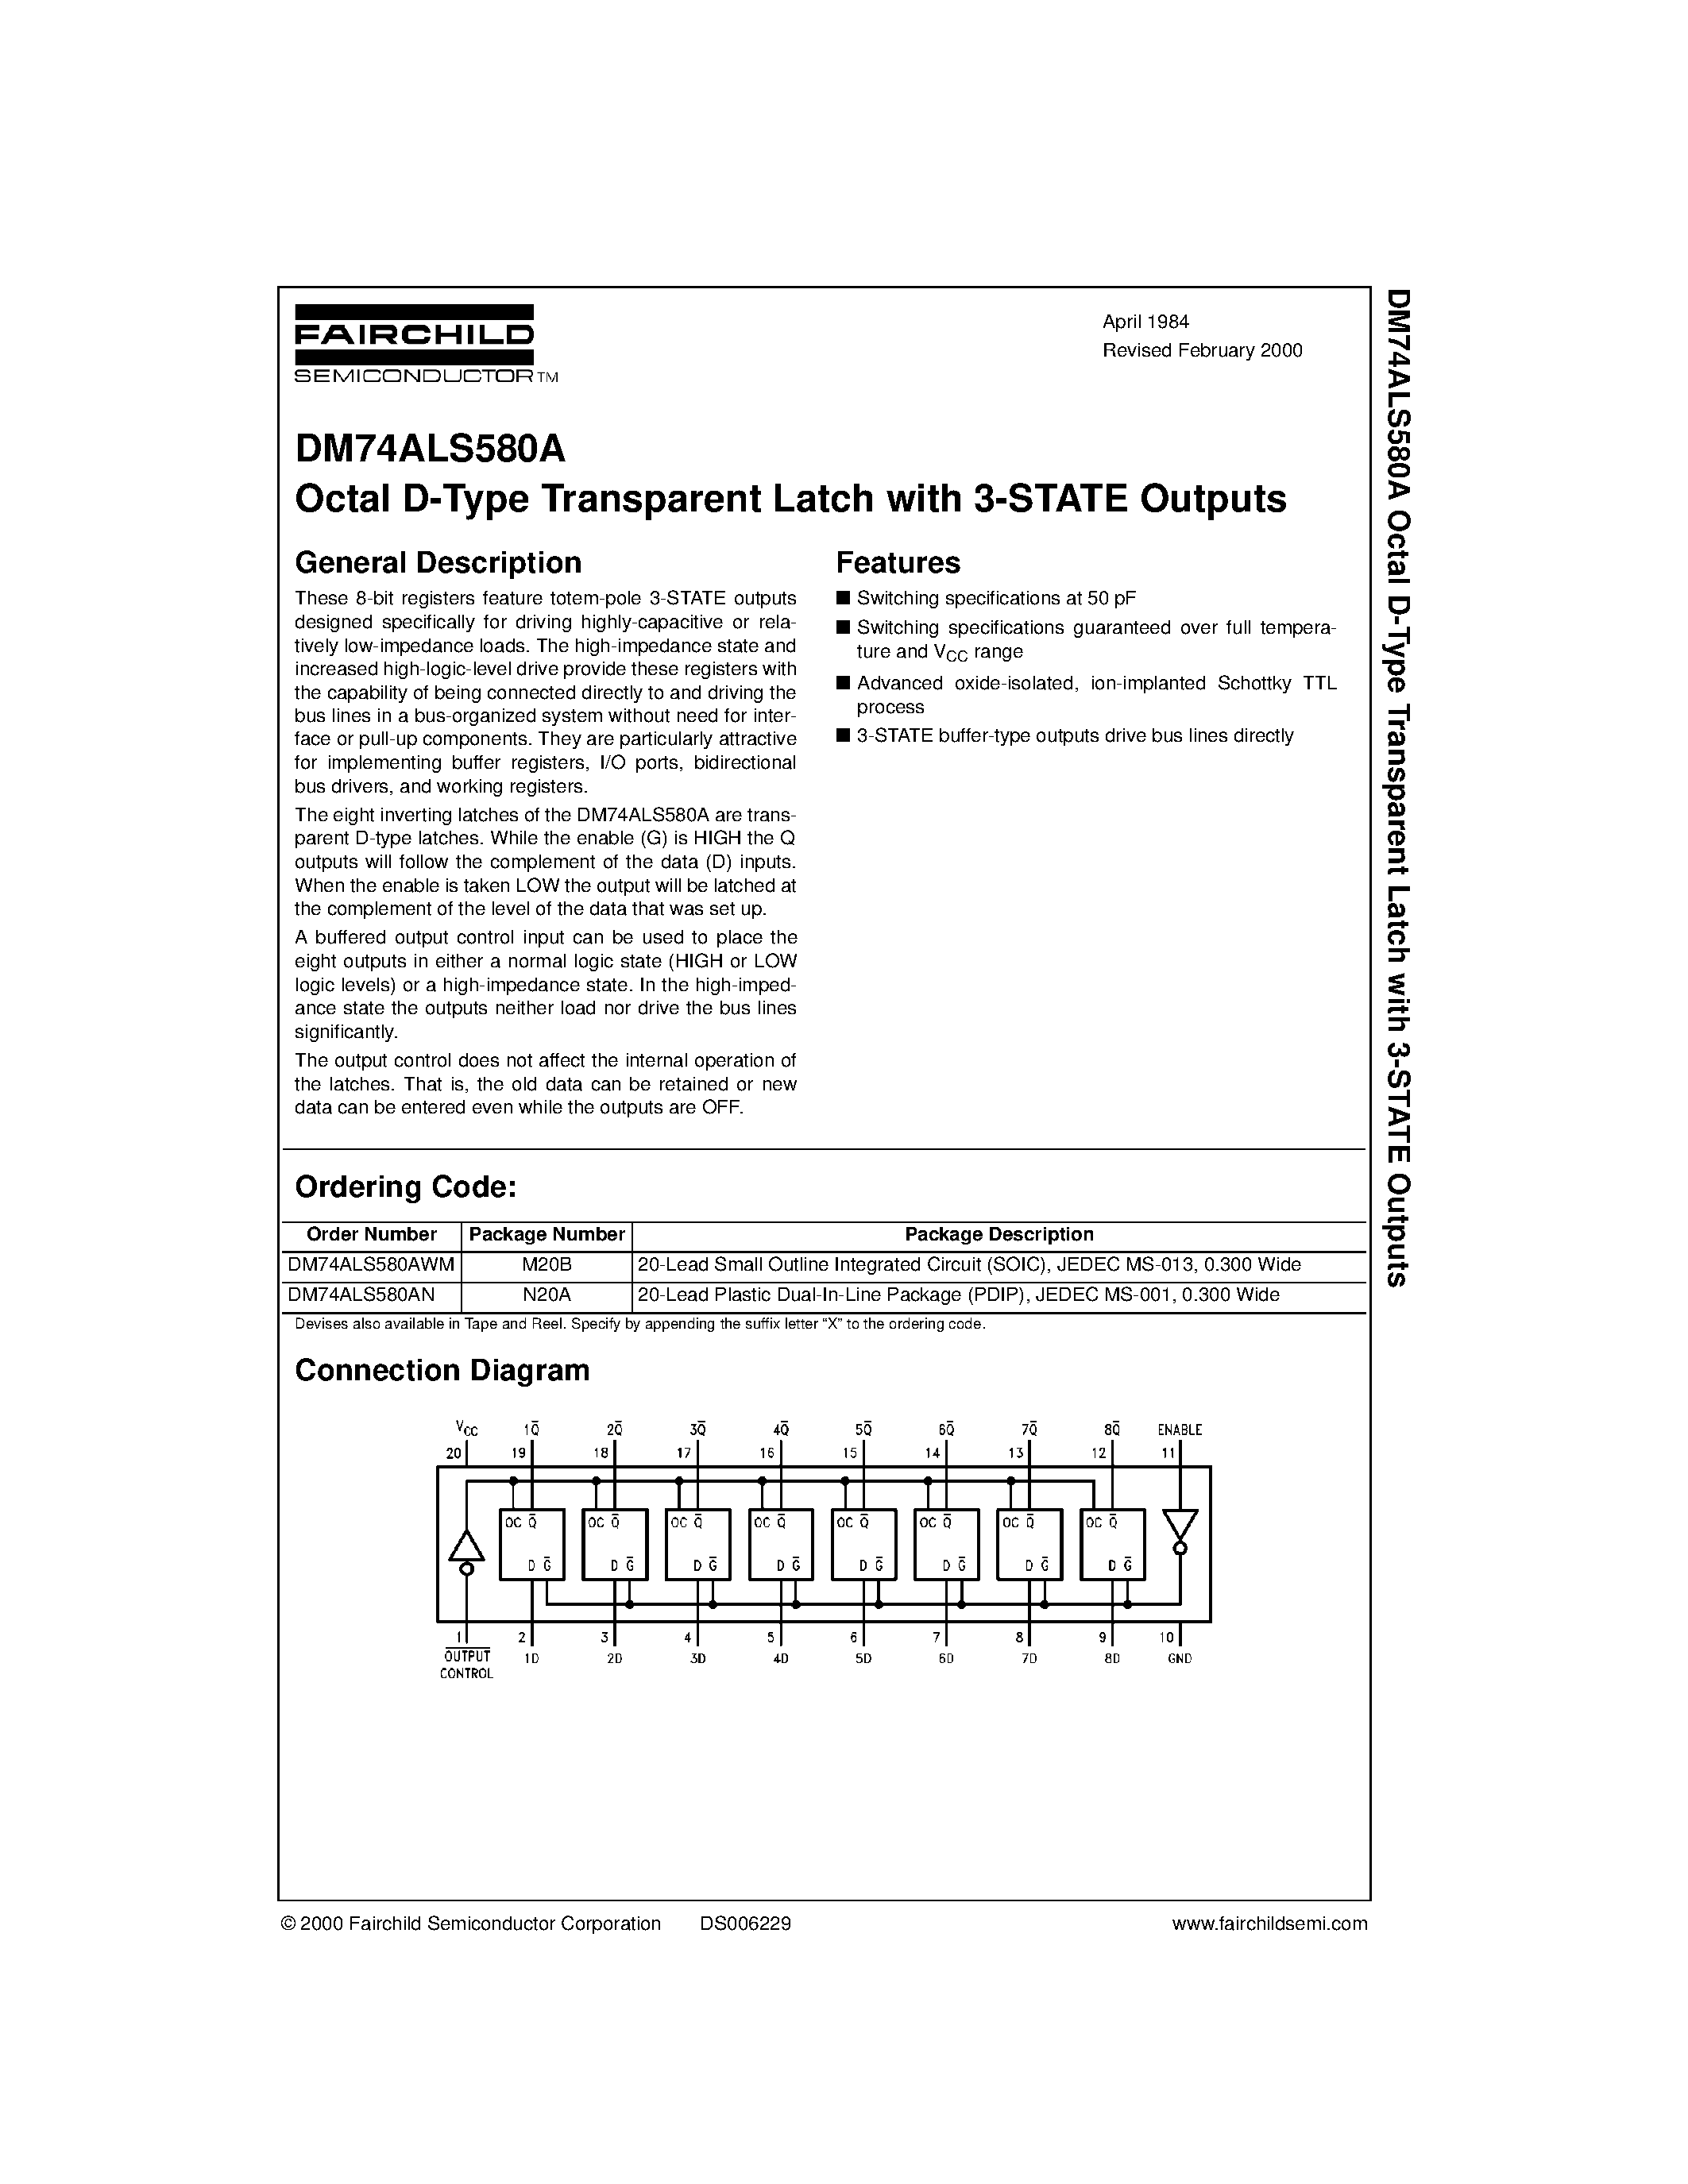 Datasheet DM74ALS580A - Octal D-Type Transparent Latch with 3-STATE Outputs page 1